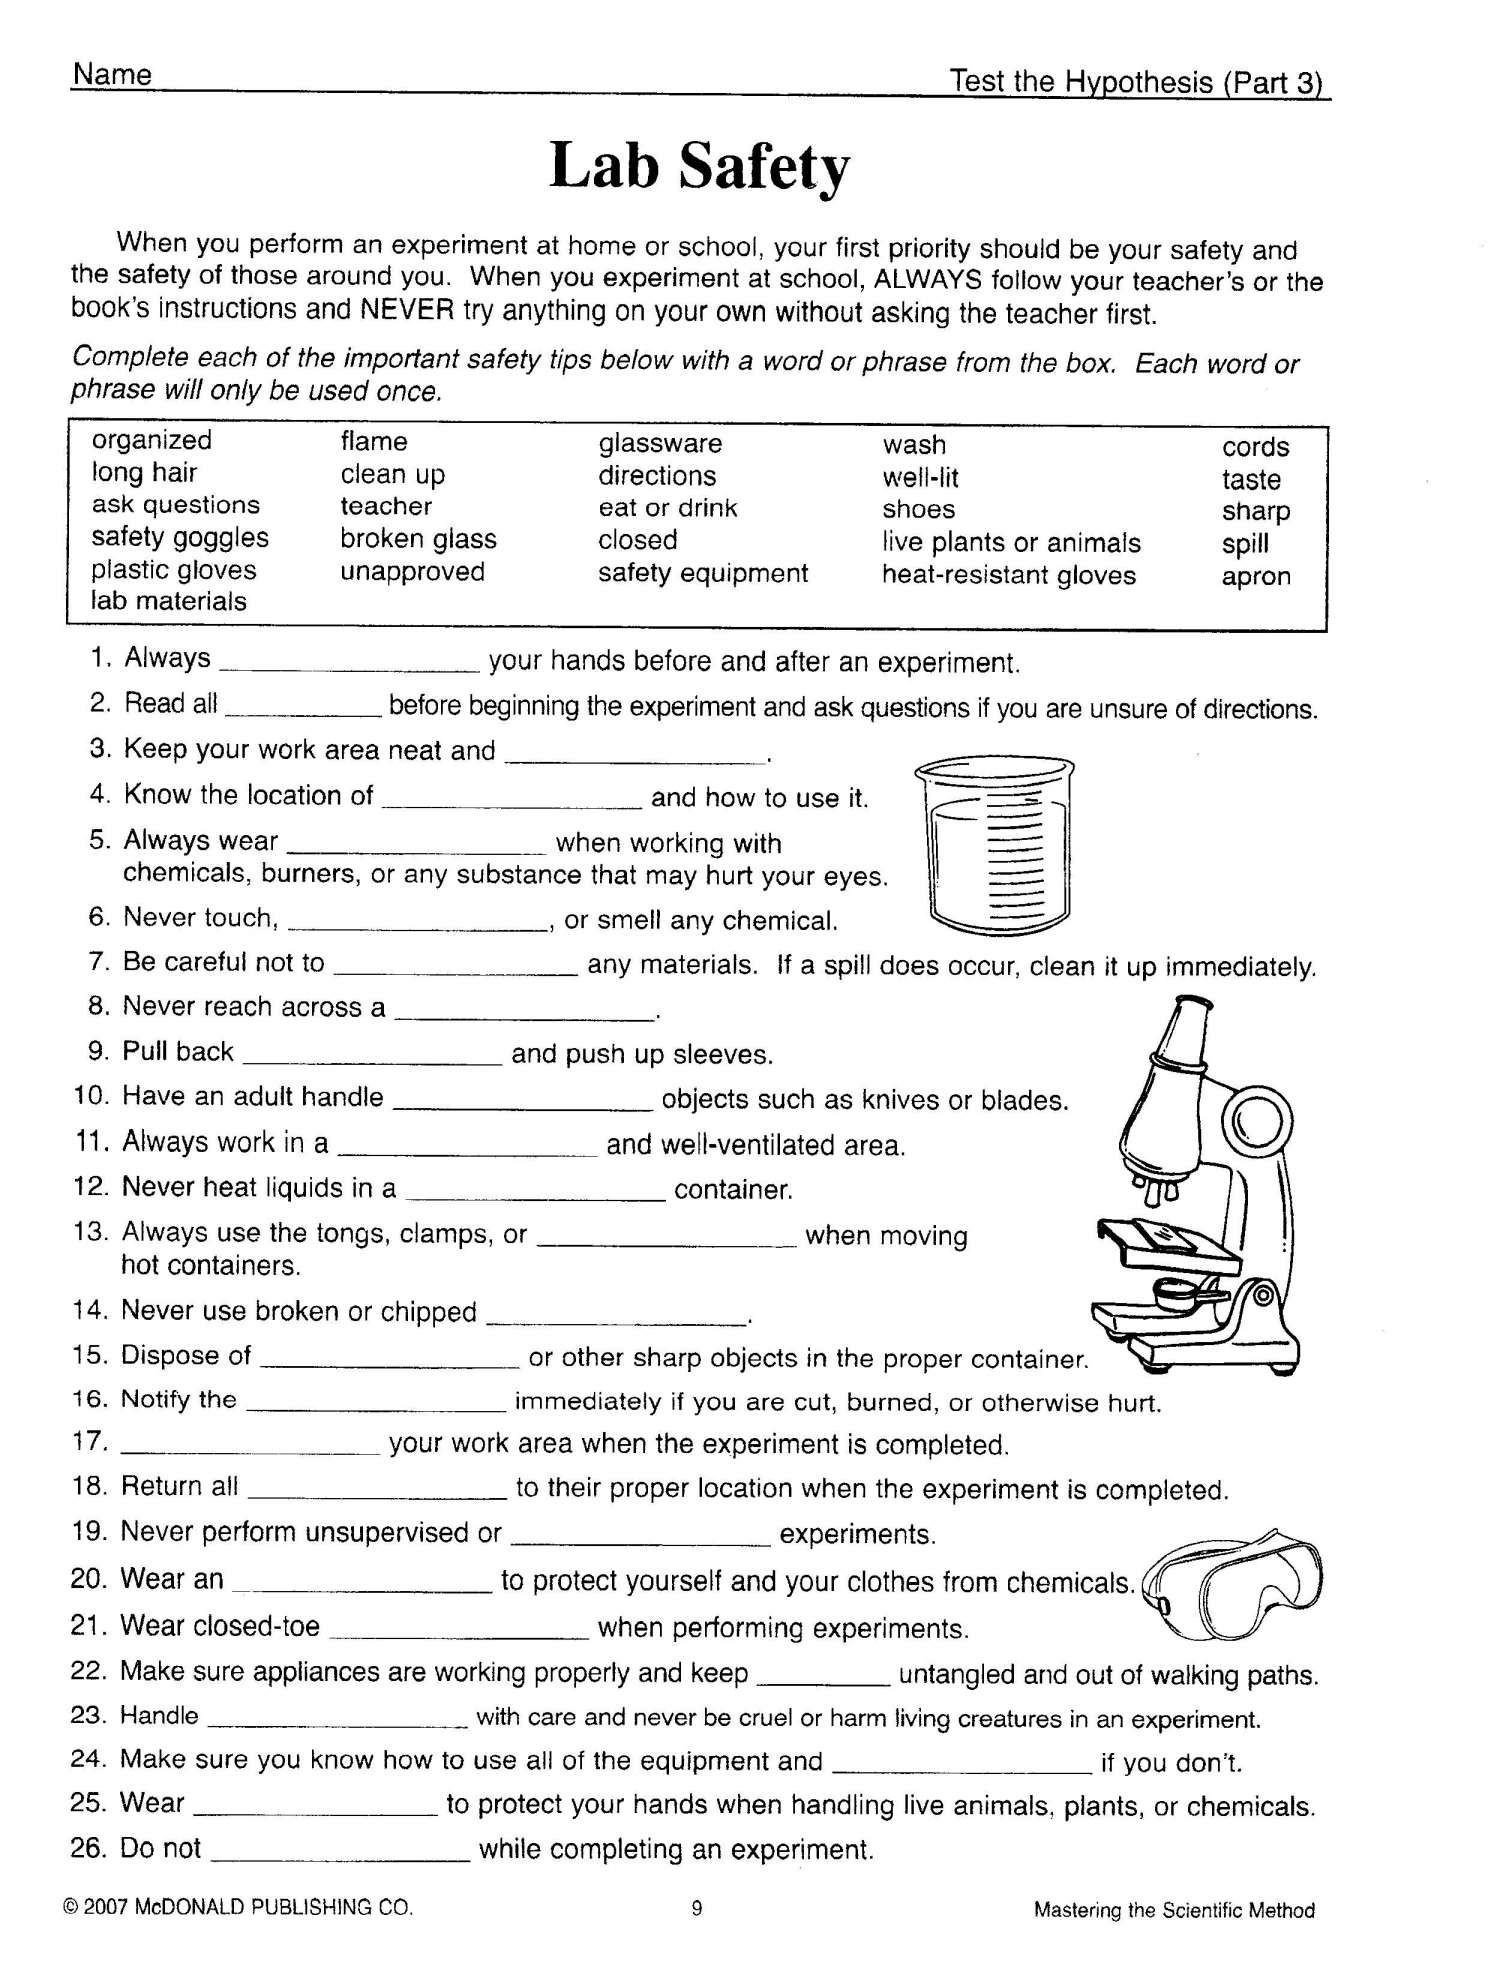 Experimental Variables Worksheet Answers 11 Safety In the Science Laboratory Worksheet Answers